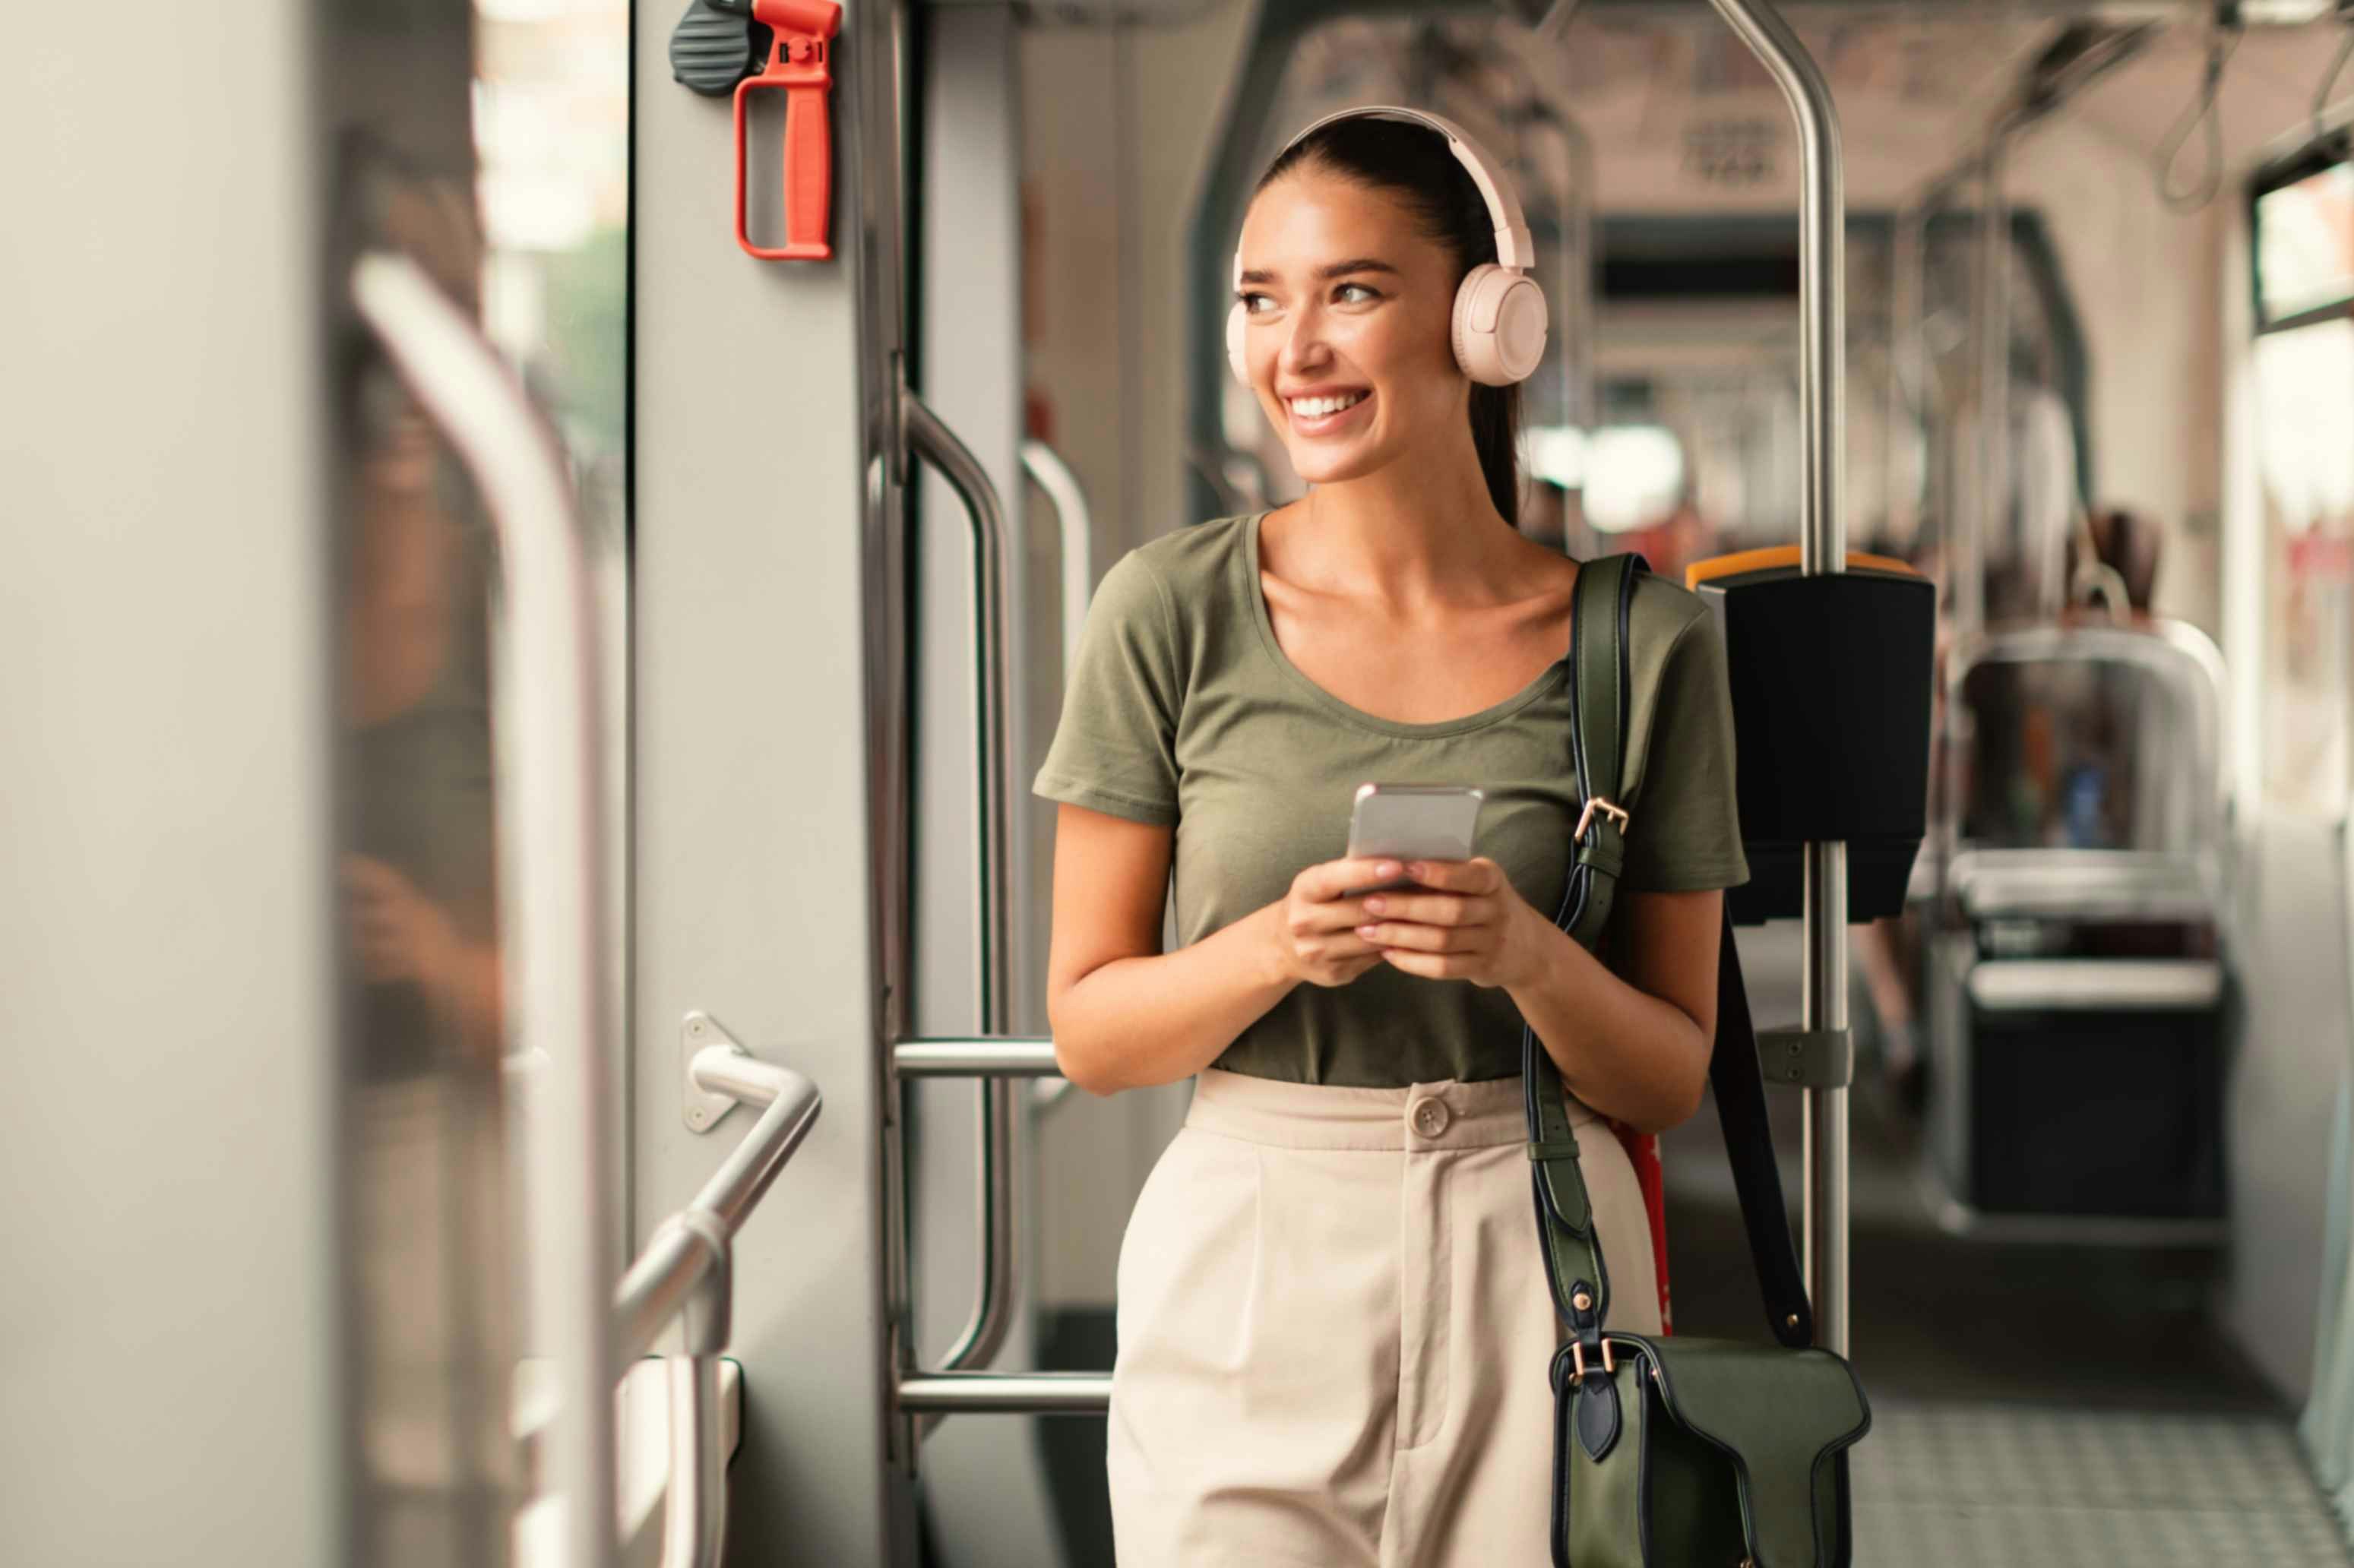 a woman smiling on public transport